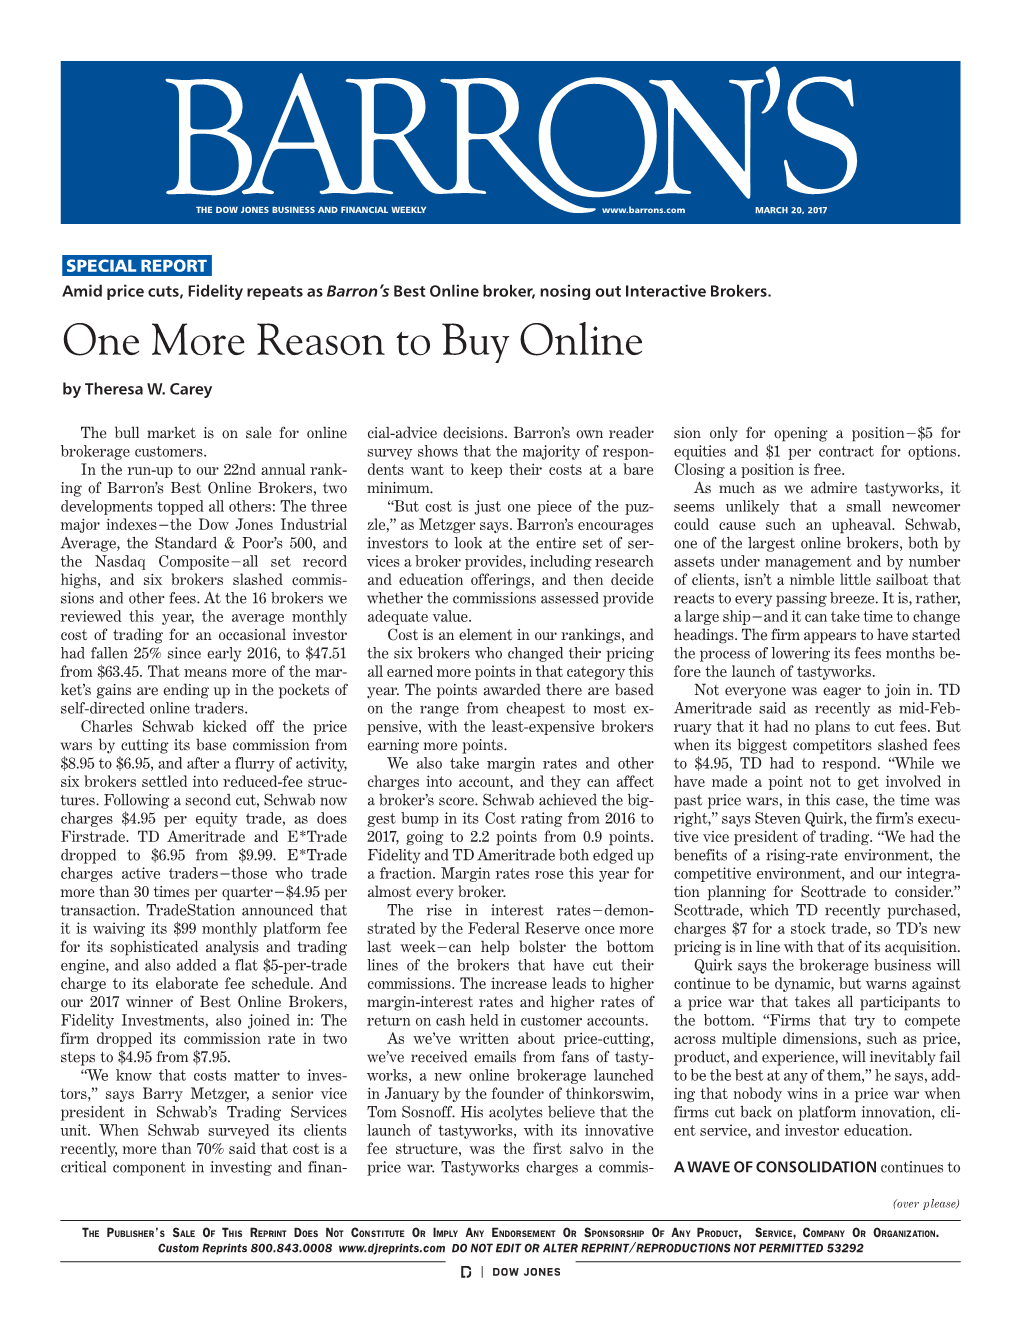 One More Reason to Buy Online by Theresa W